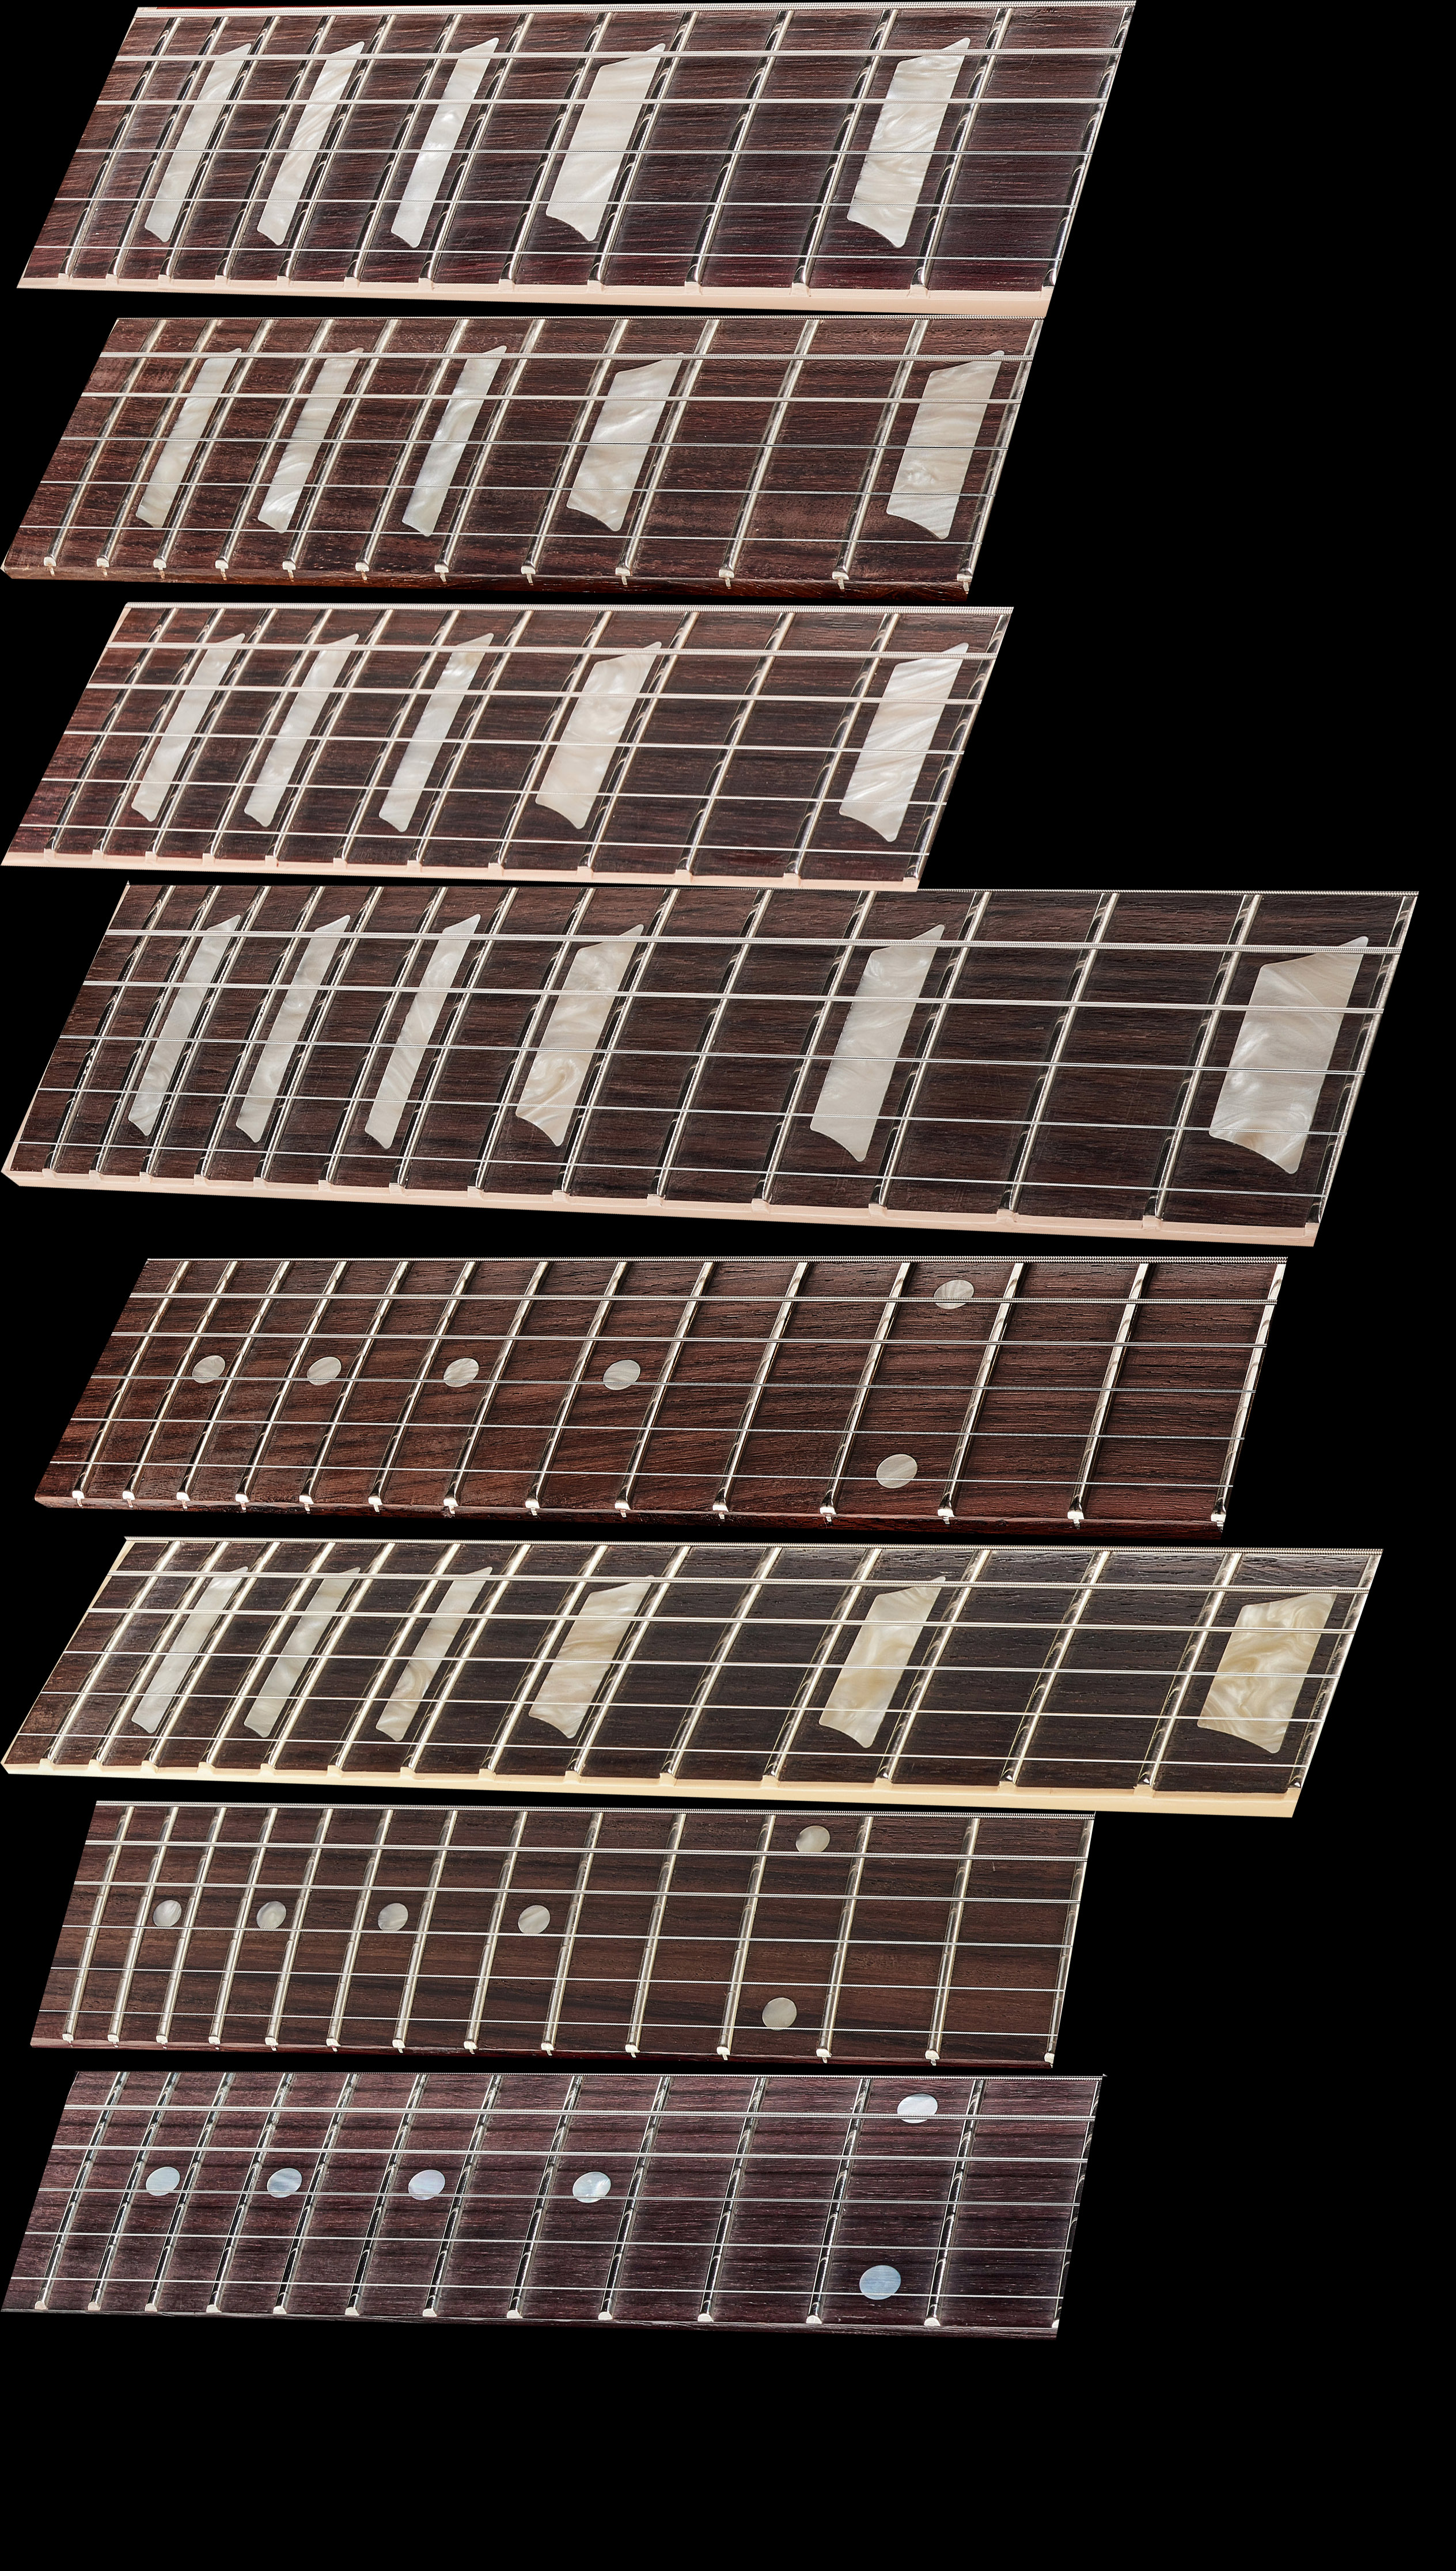 Gibson_USA2017_Rosewood_Issues.jpg